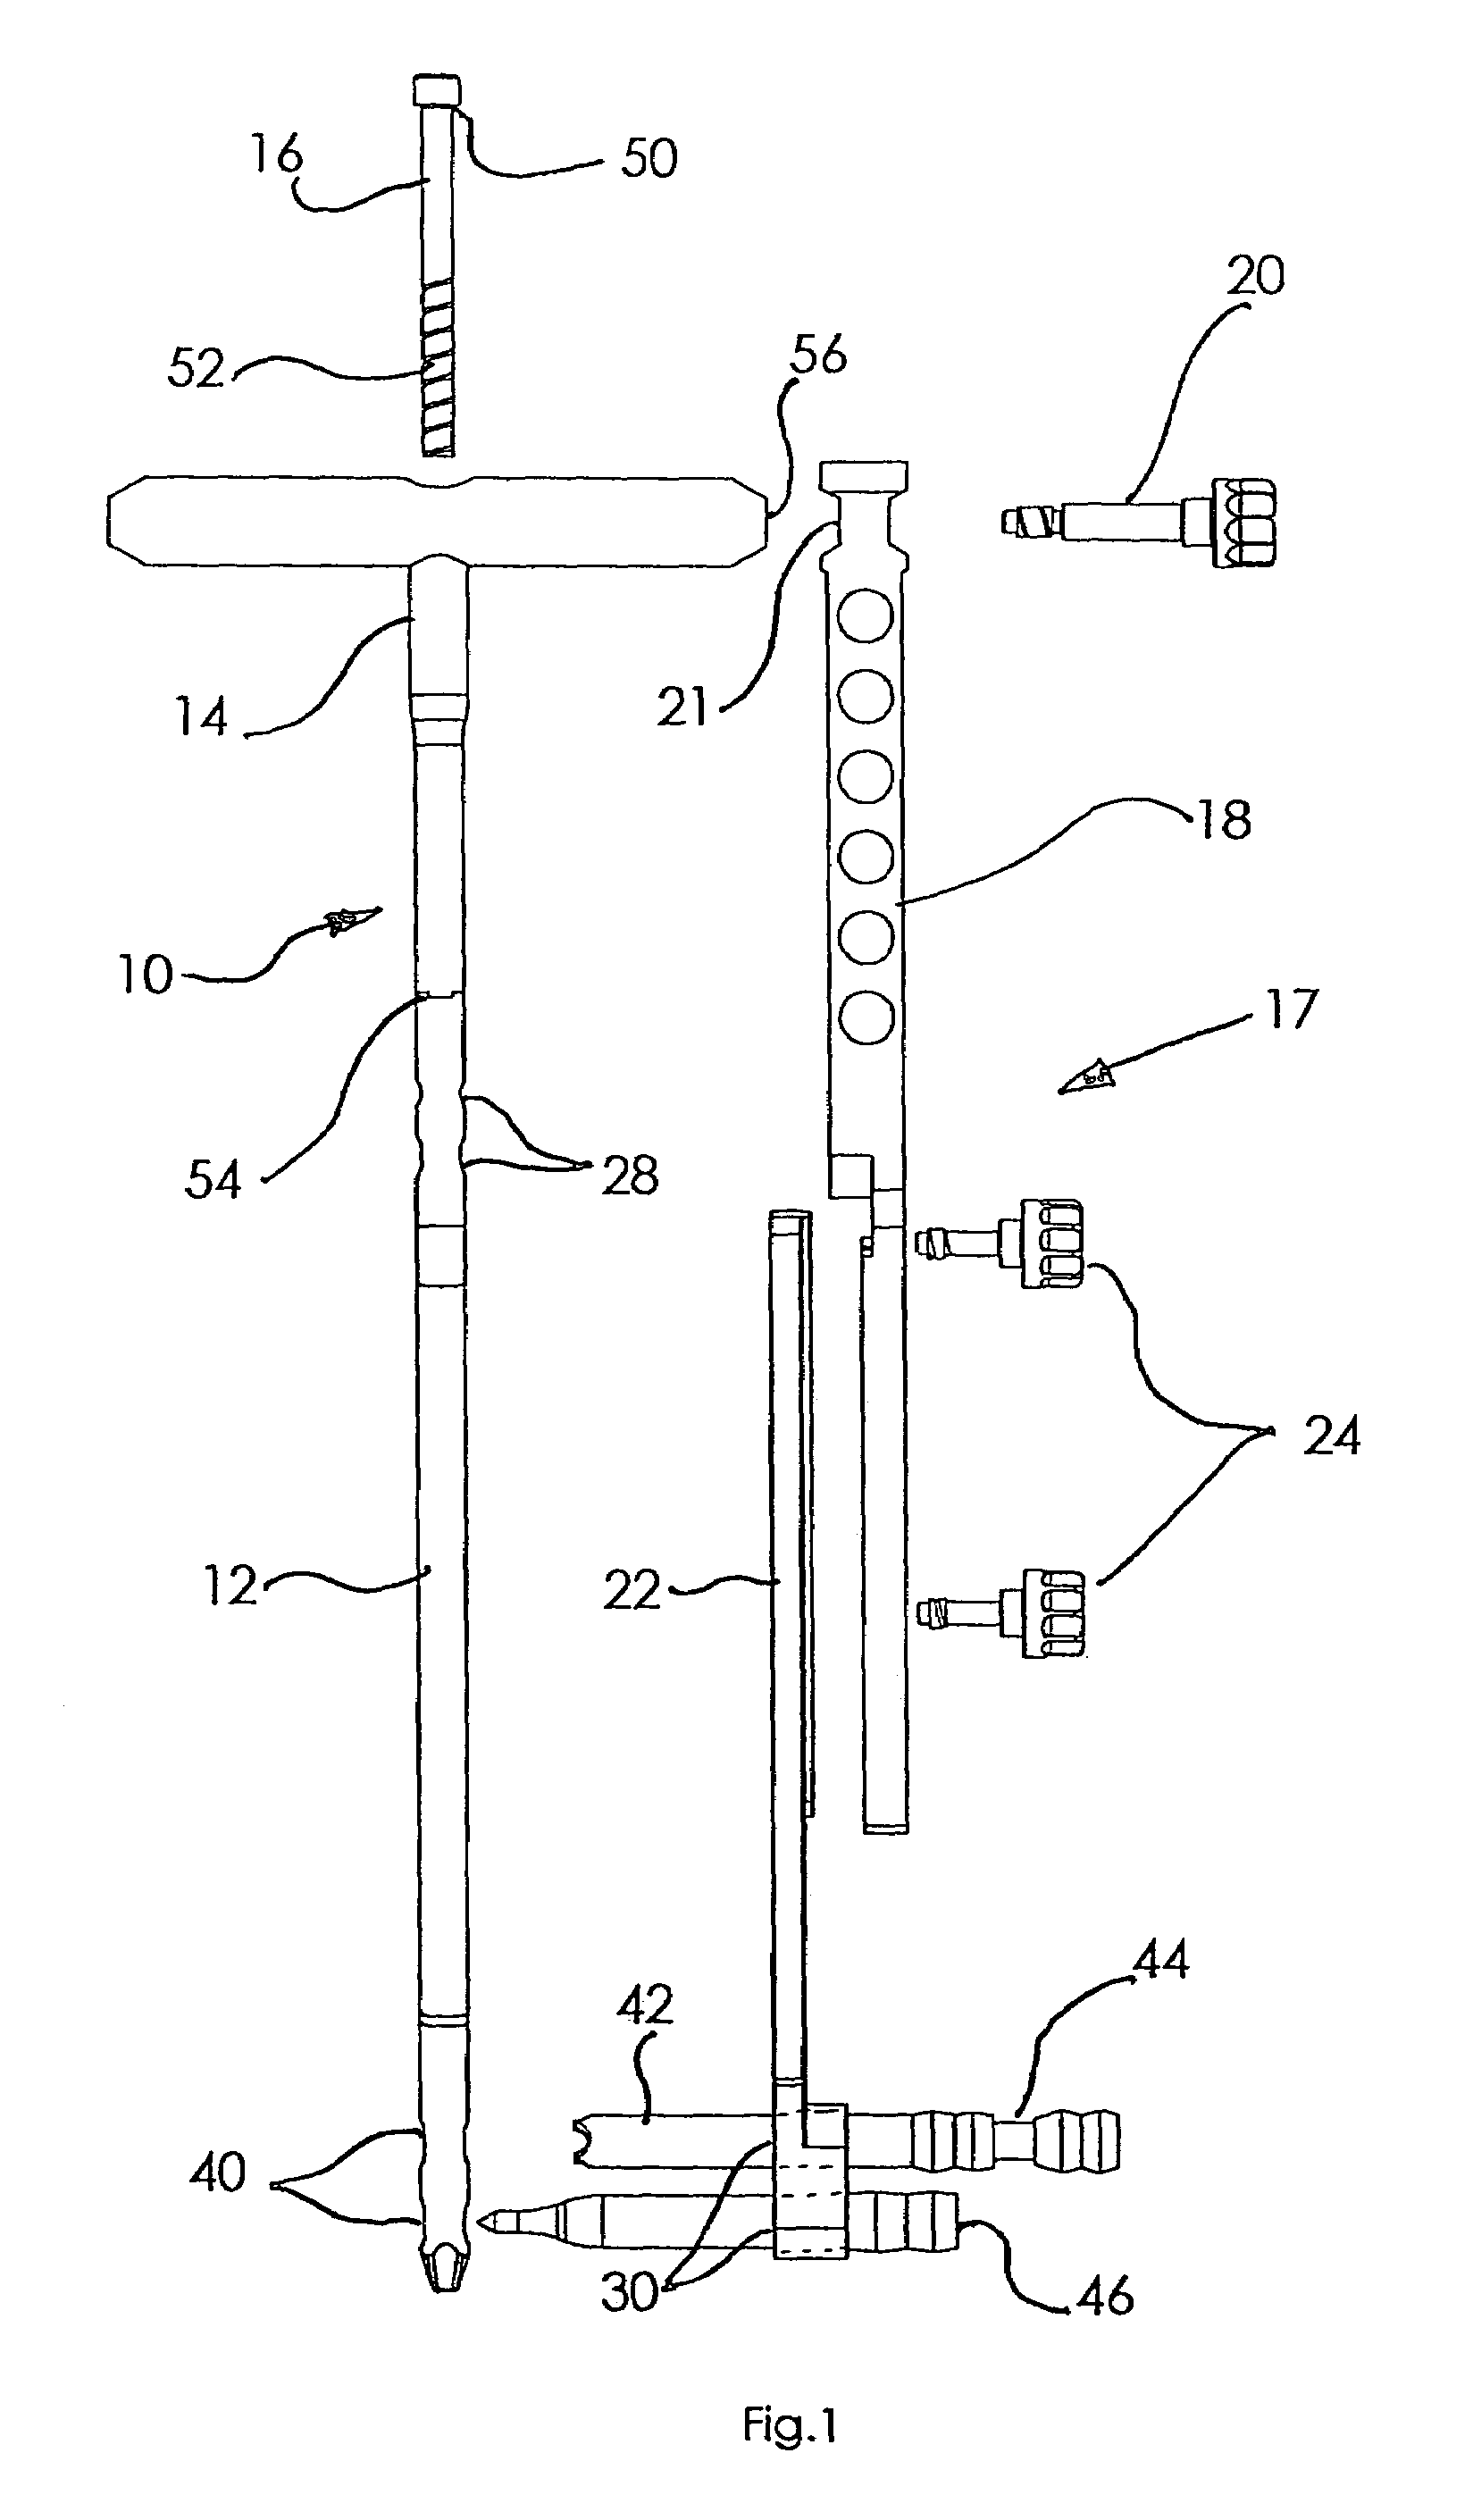 Method and apparatus for locating and stabilizing an orthopedic implant